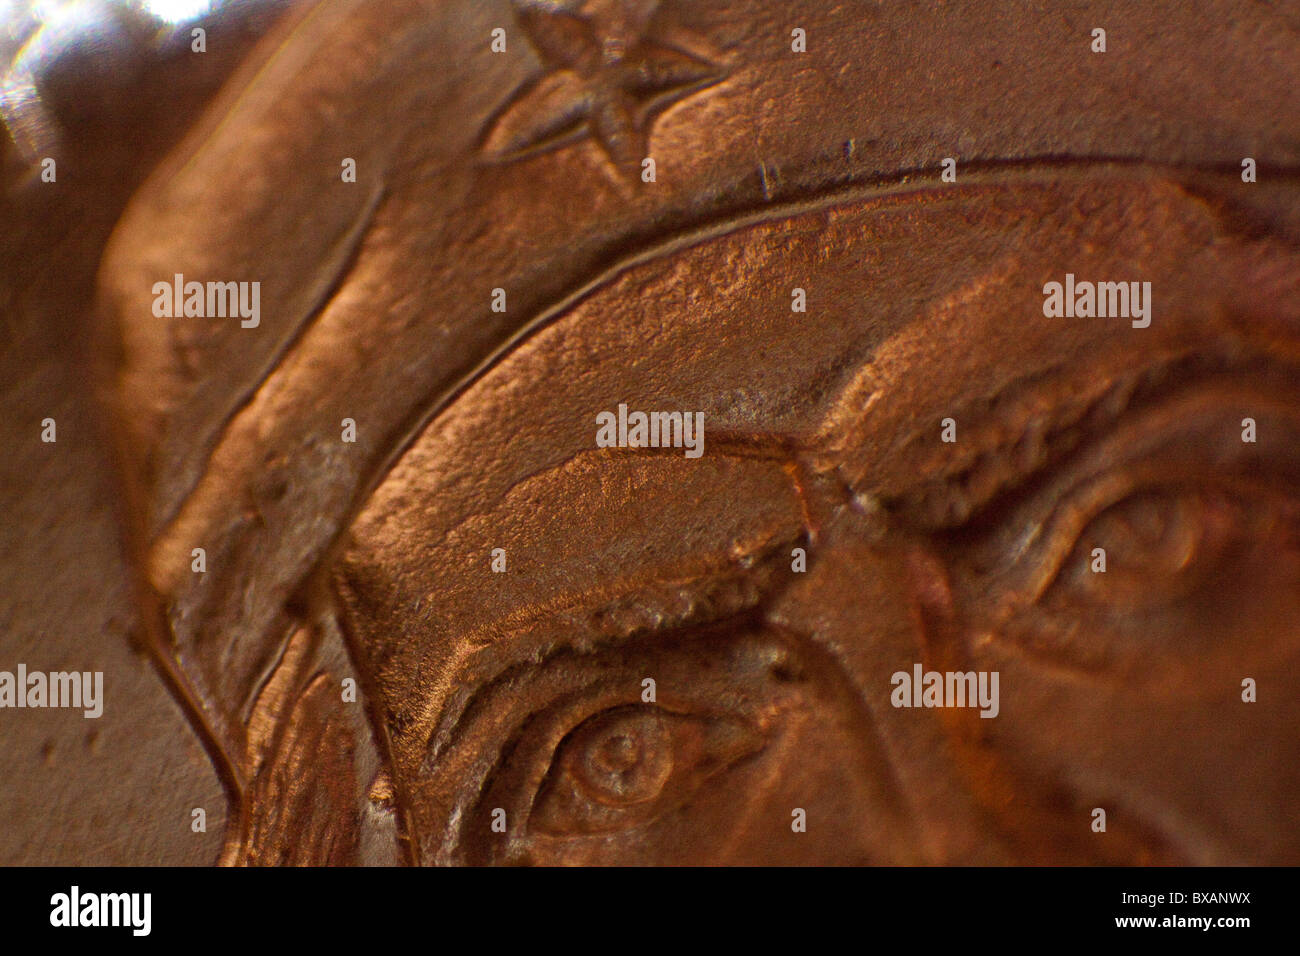 Macro Shots of Coins for Stock Stock Photo